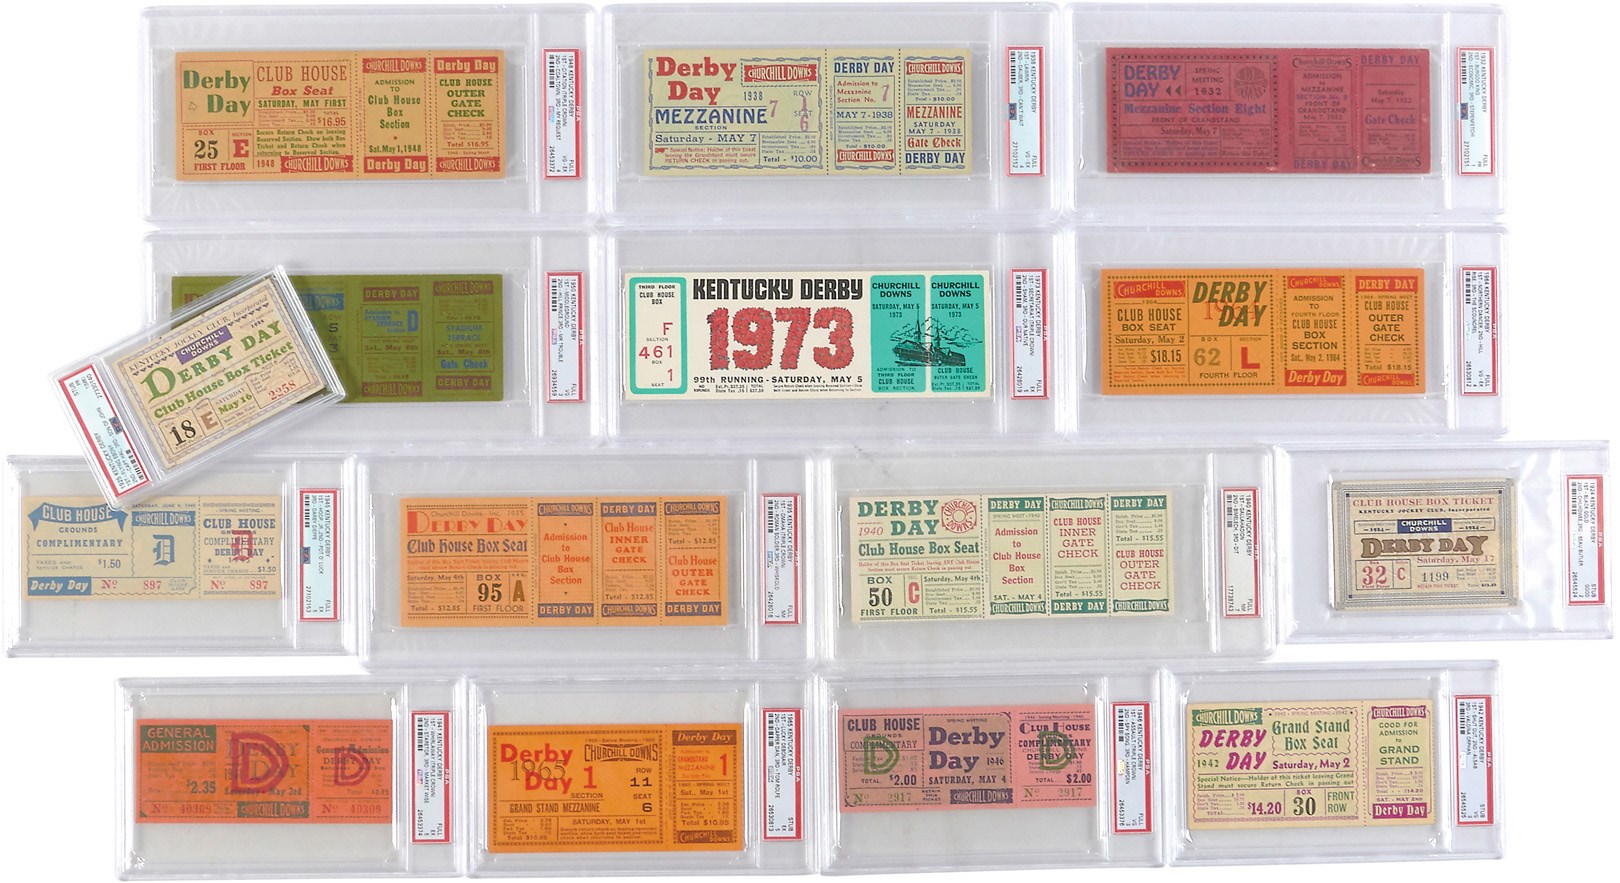 Horse Racing - World's Finest Kentucky Derby Ticket Collection - #1 on PSA Registry